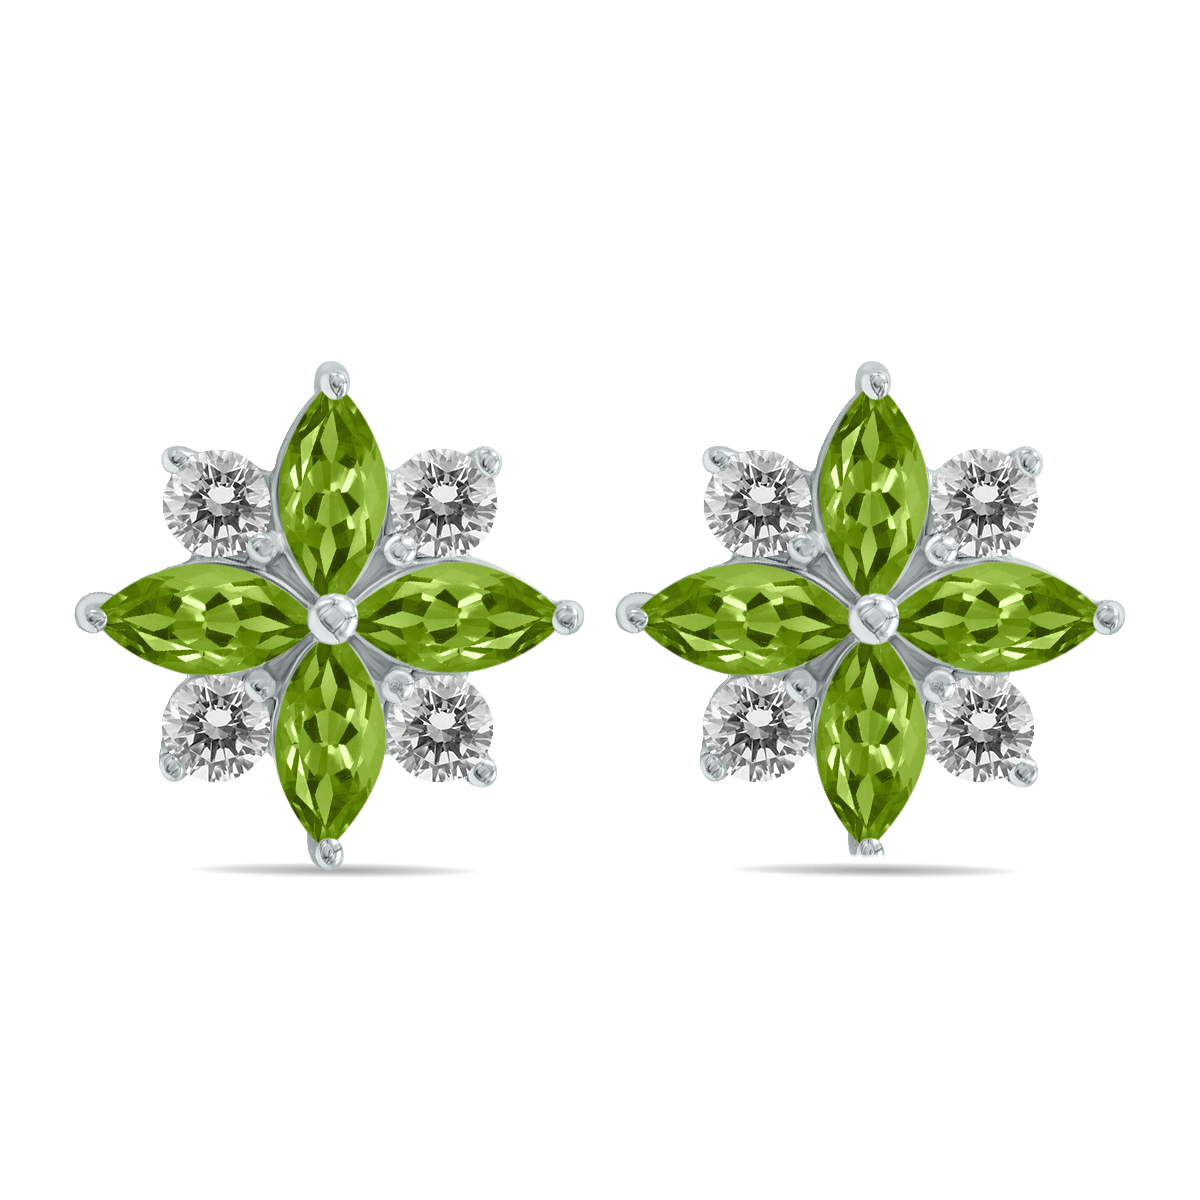 Image of 1 Carat TW Peridot and Diamond Flower Earrings in 10K White Gold